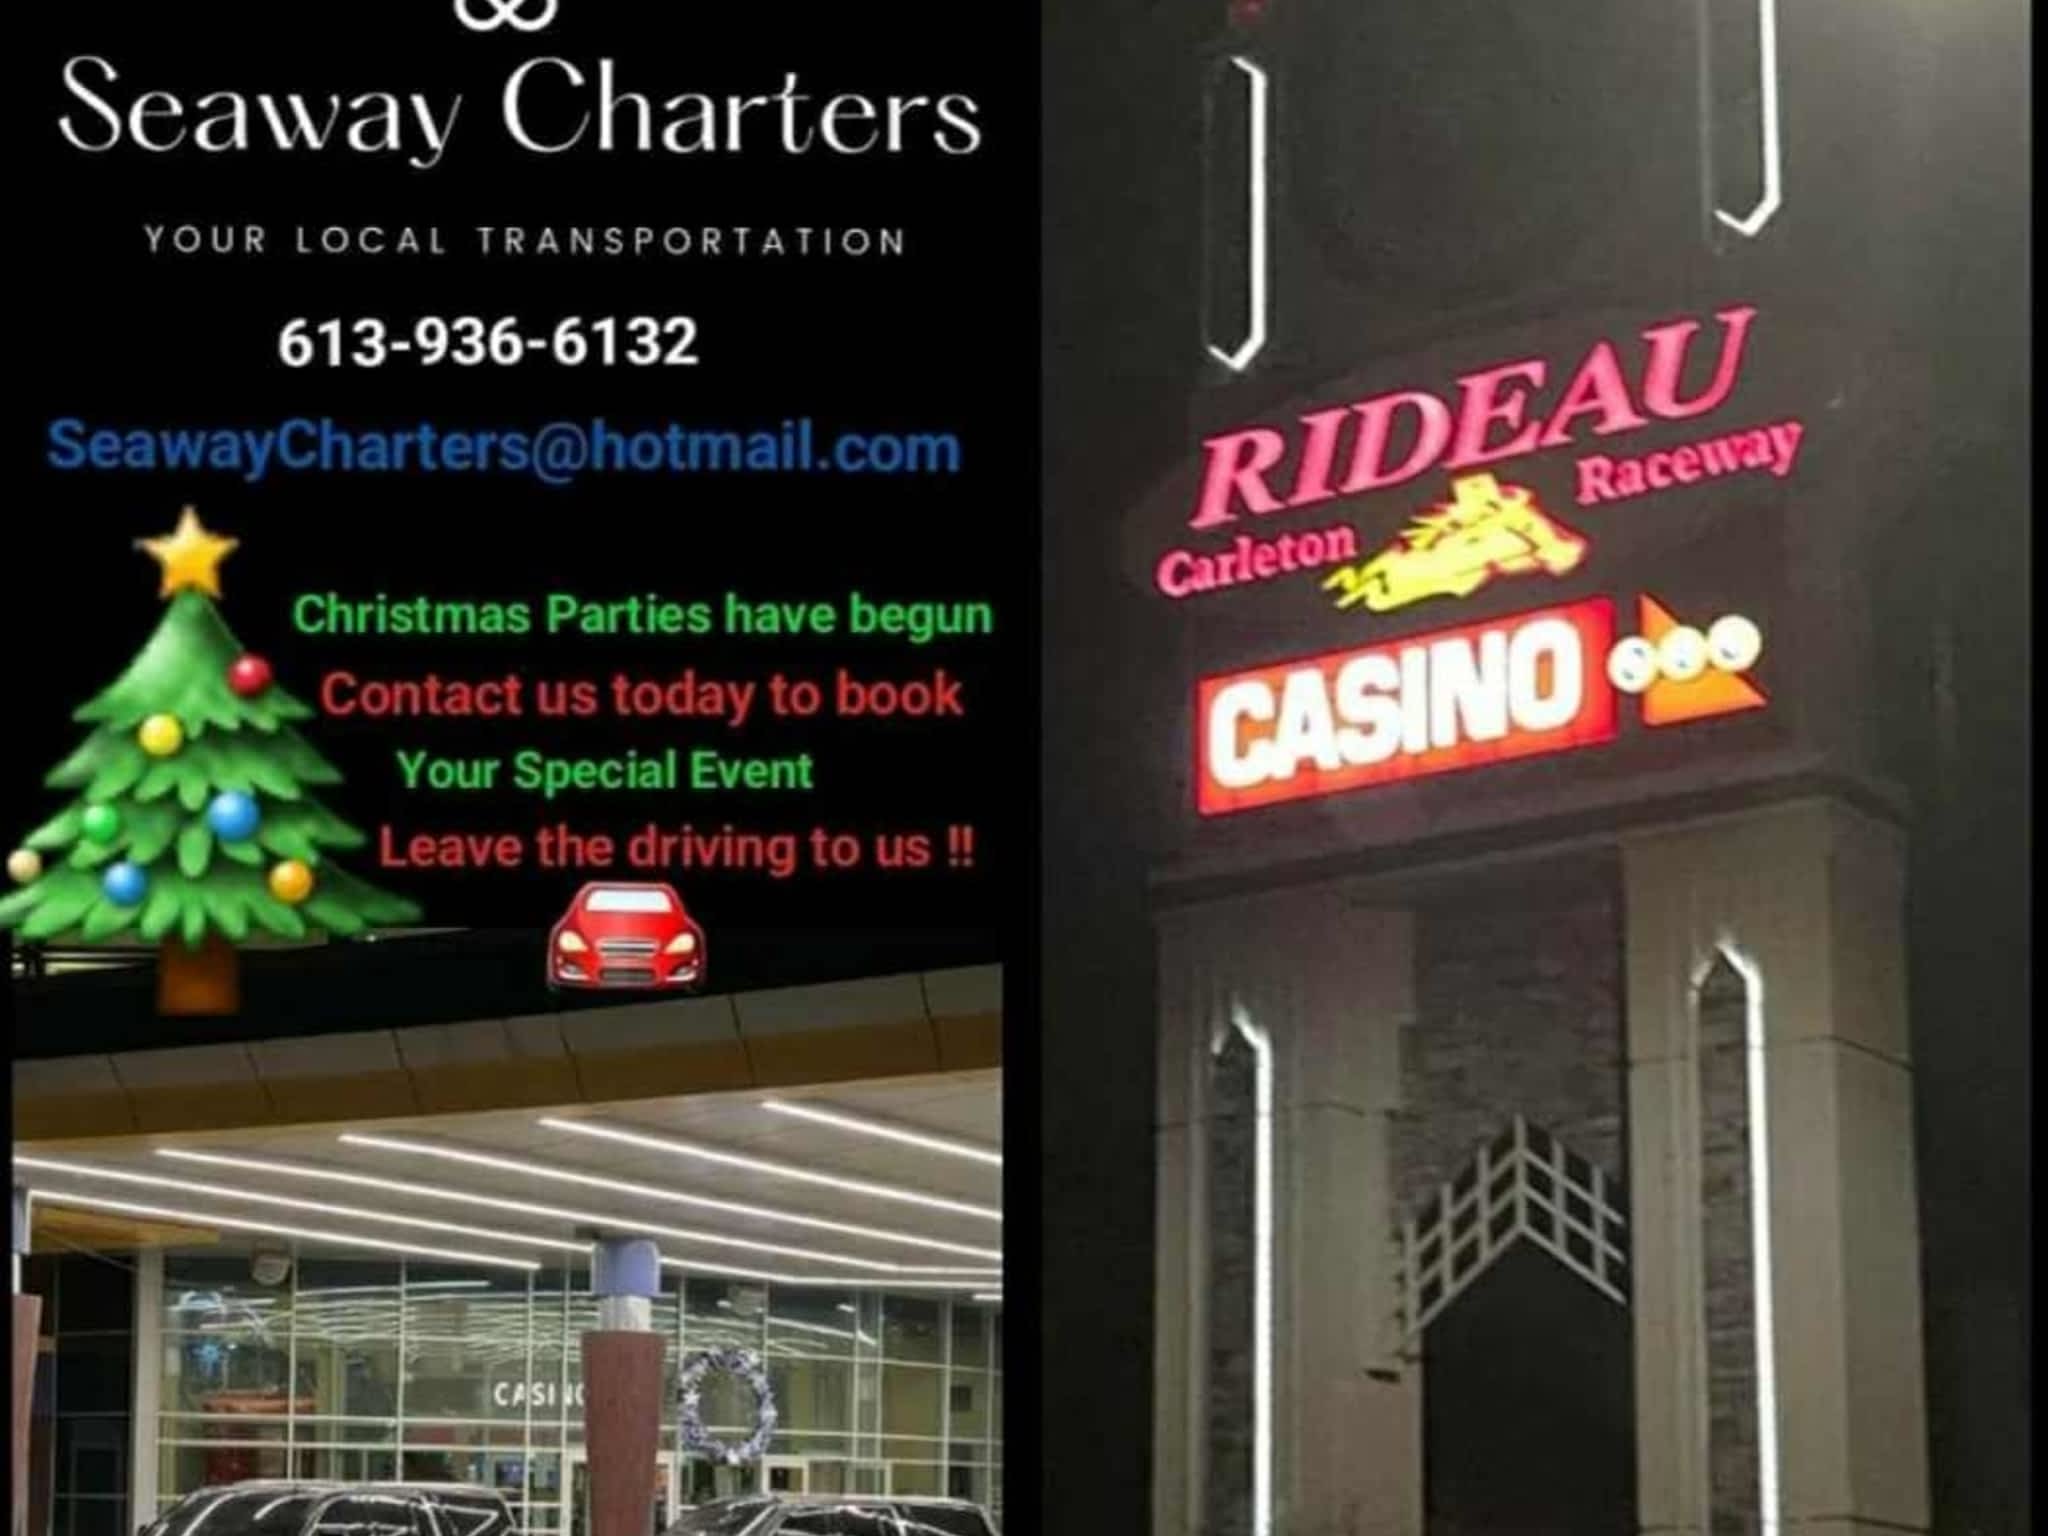 photo Seaway Charters - Your Local Transportation